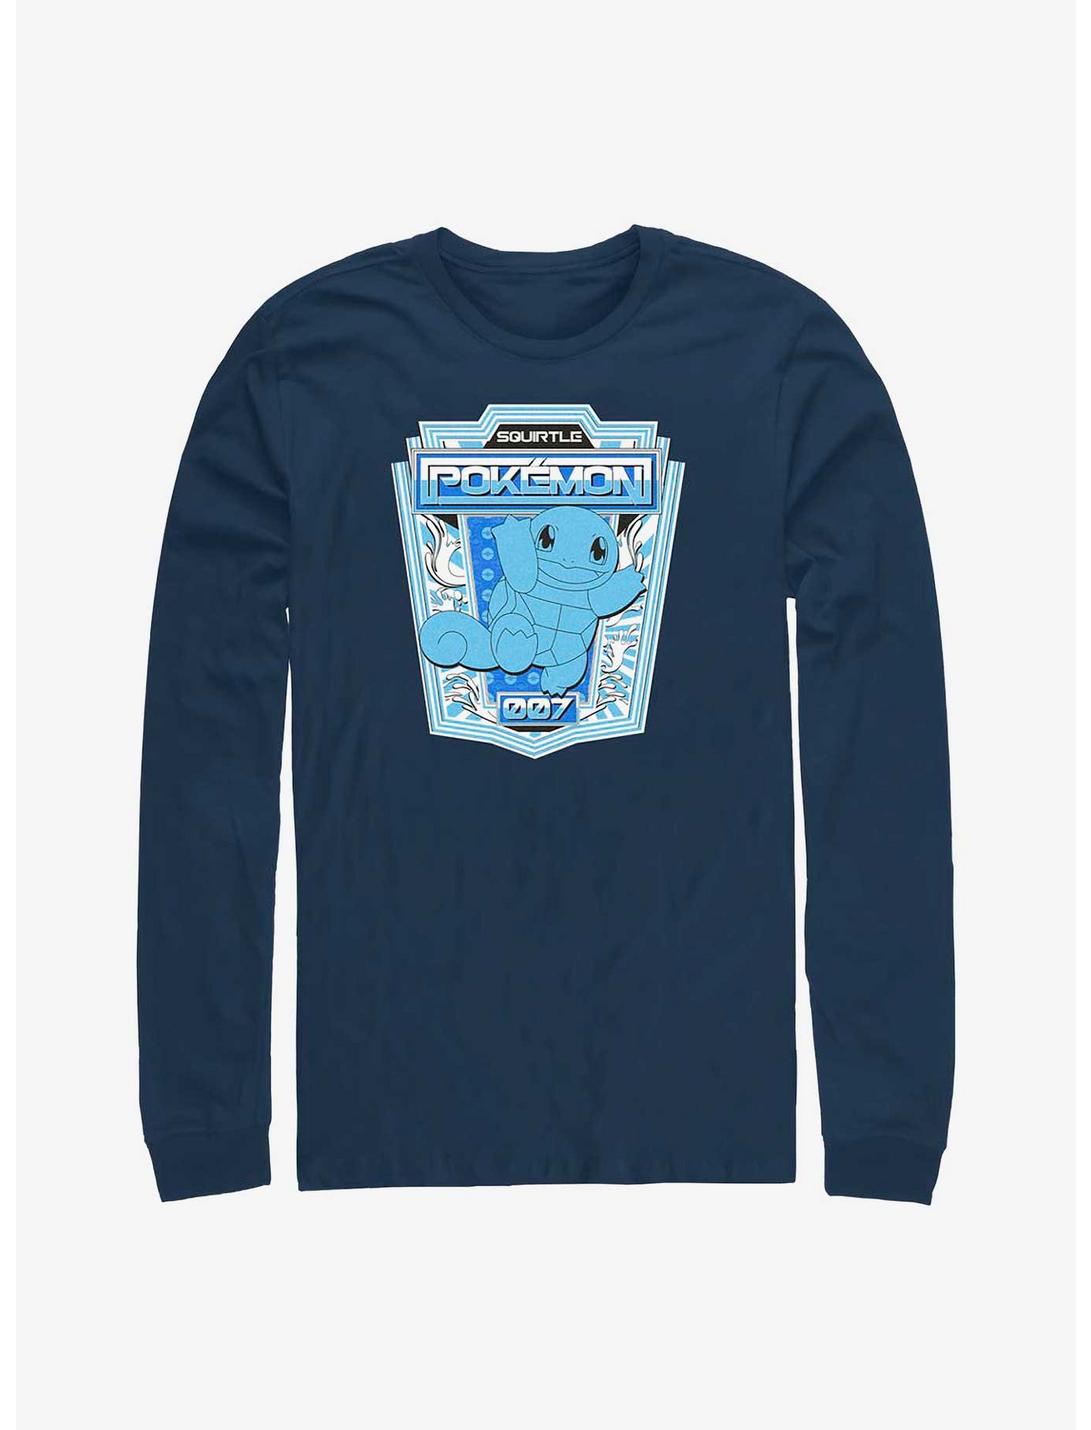 Pokemon Squirtle Badge Long-Sleeve T-Shirt, NAVY, hi-res